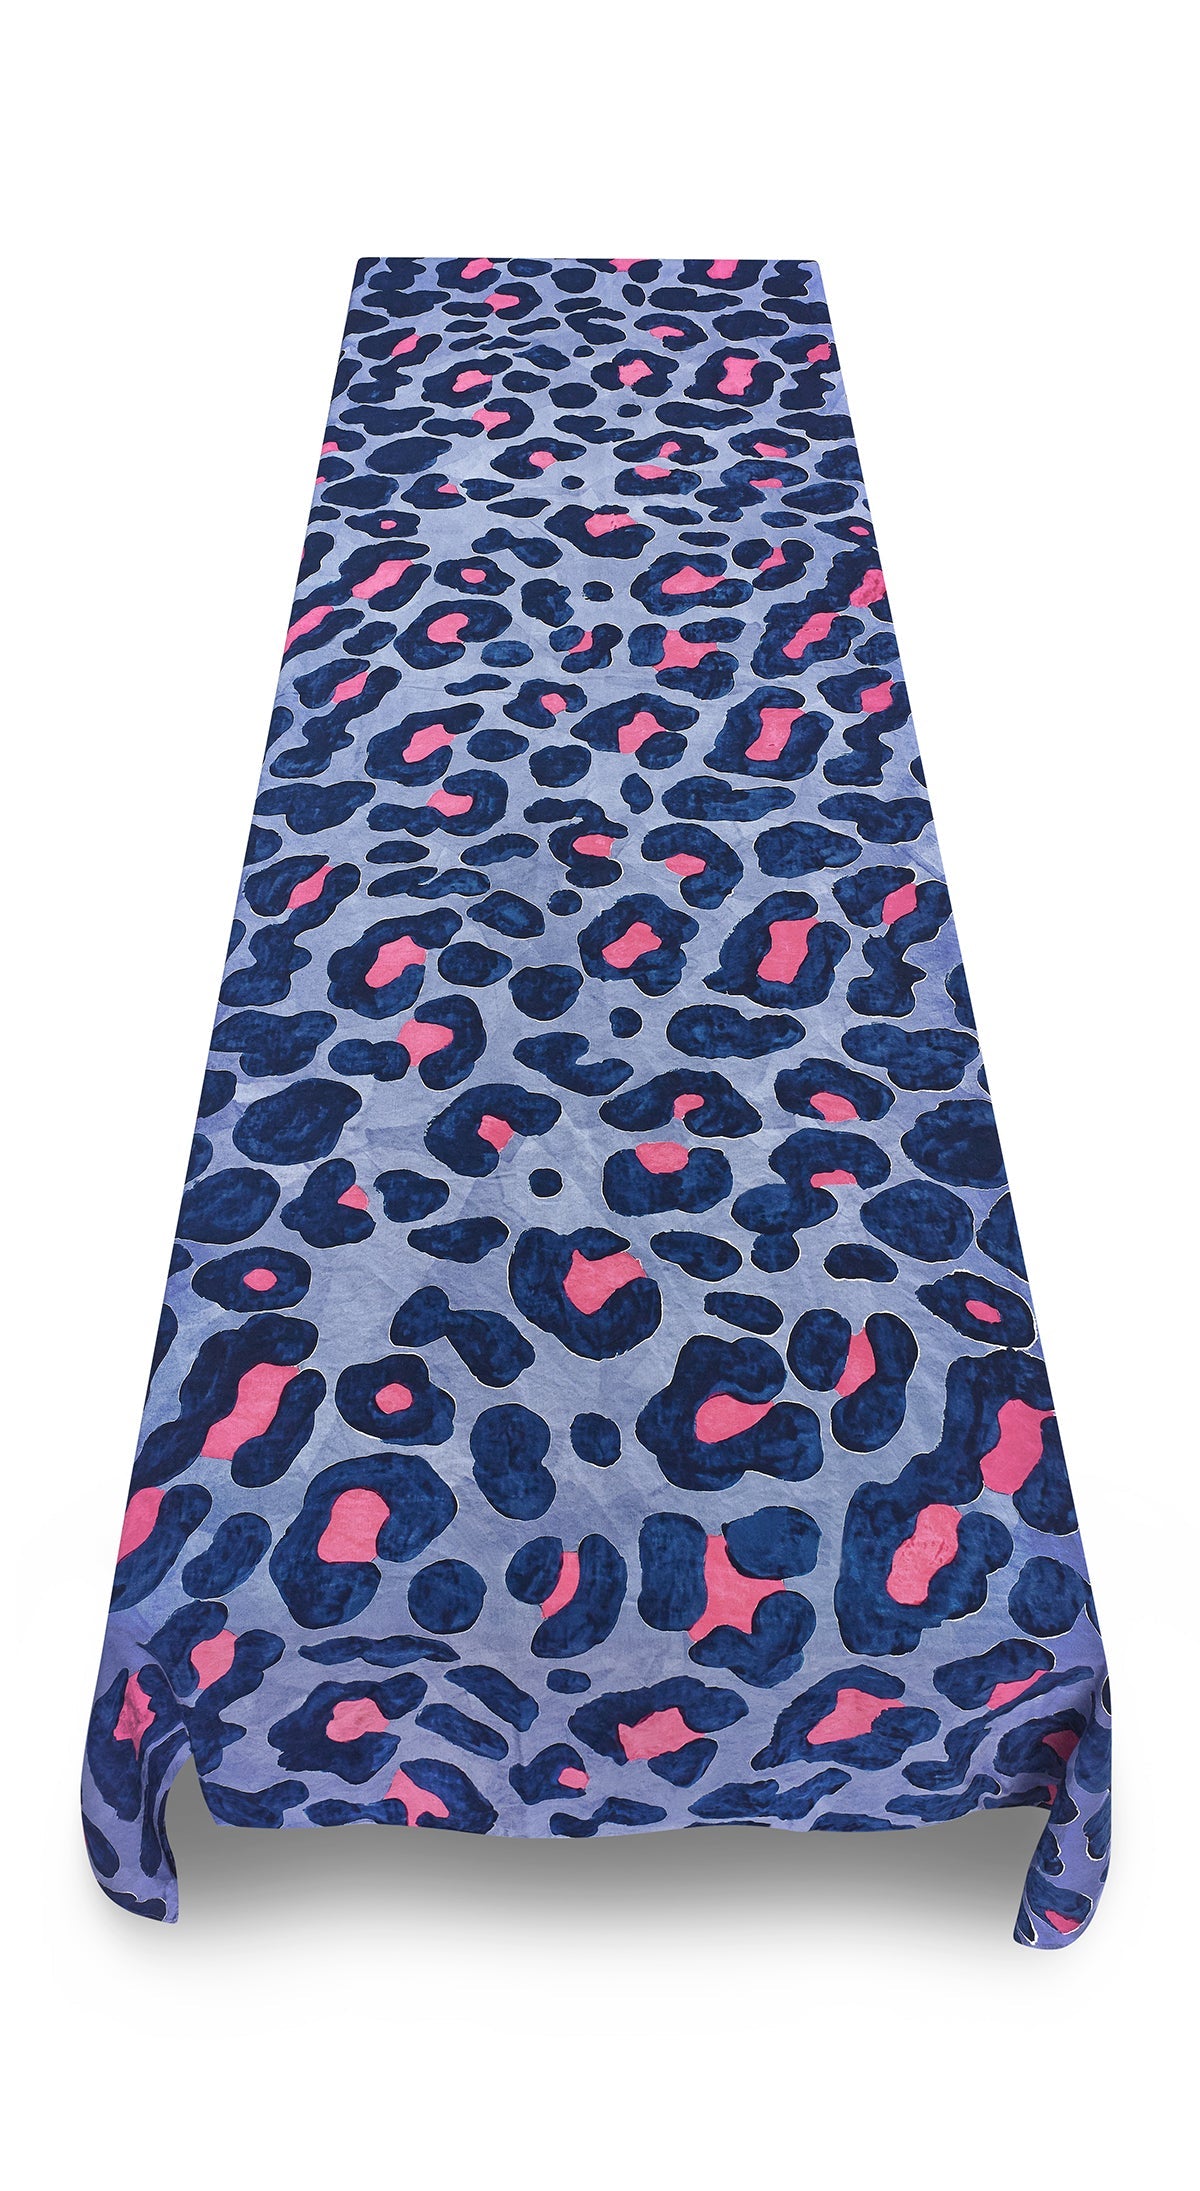 Fierce Leopard Linen Tablecloth in Powder Blue with Fuchsia Pink And Ink Blue Spots